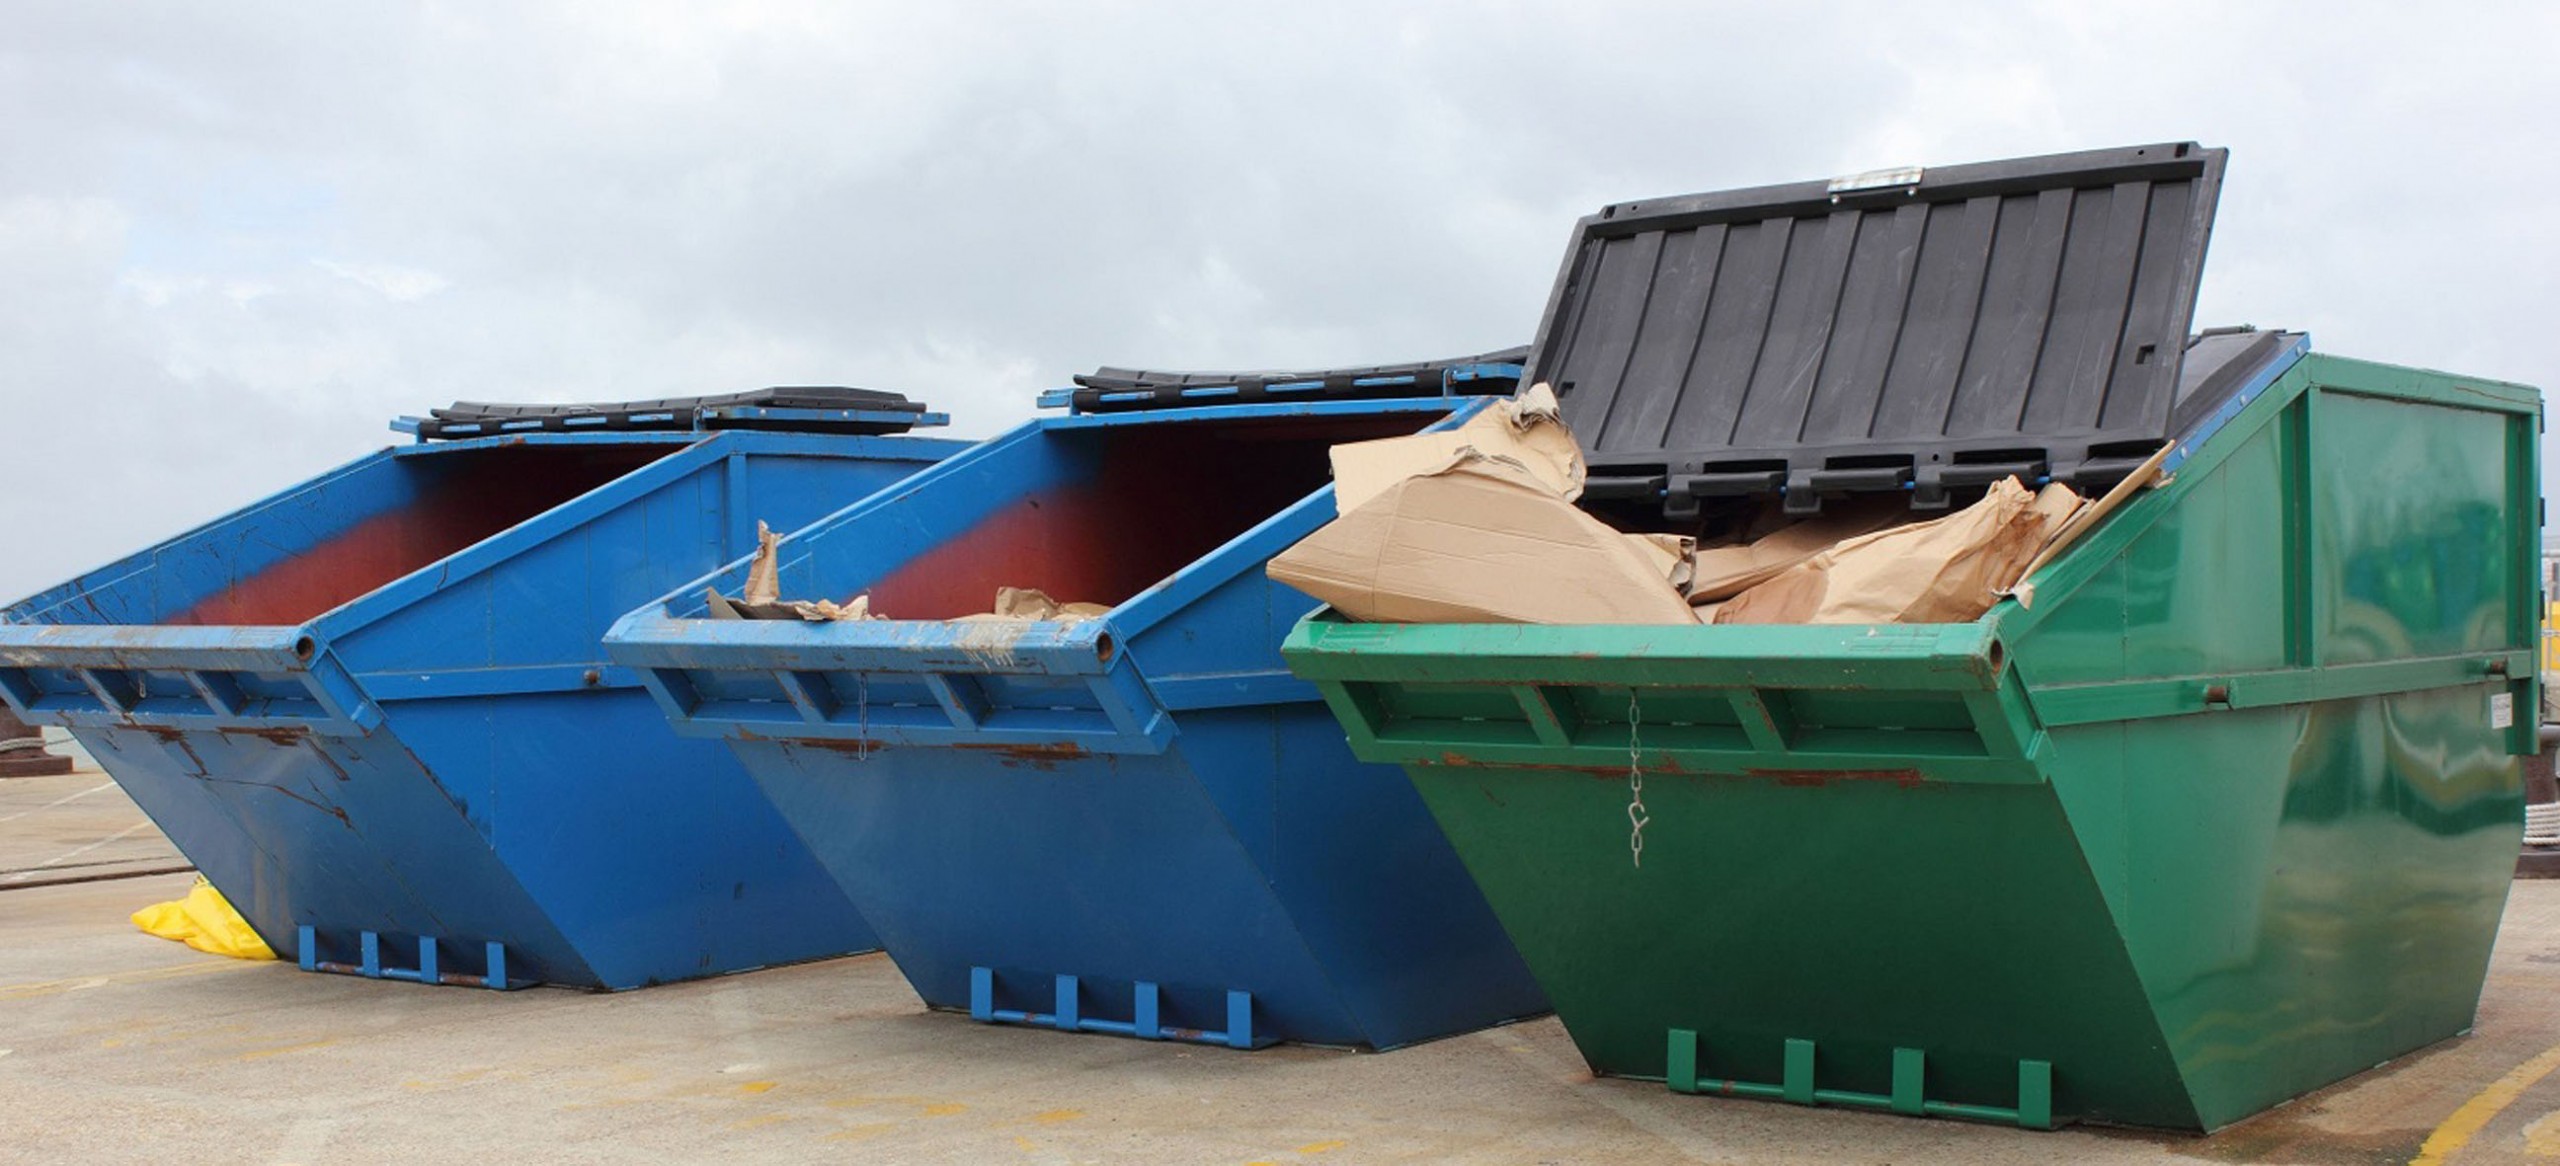 When it comes to mini skip hire, there are a few things to keep in mind